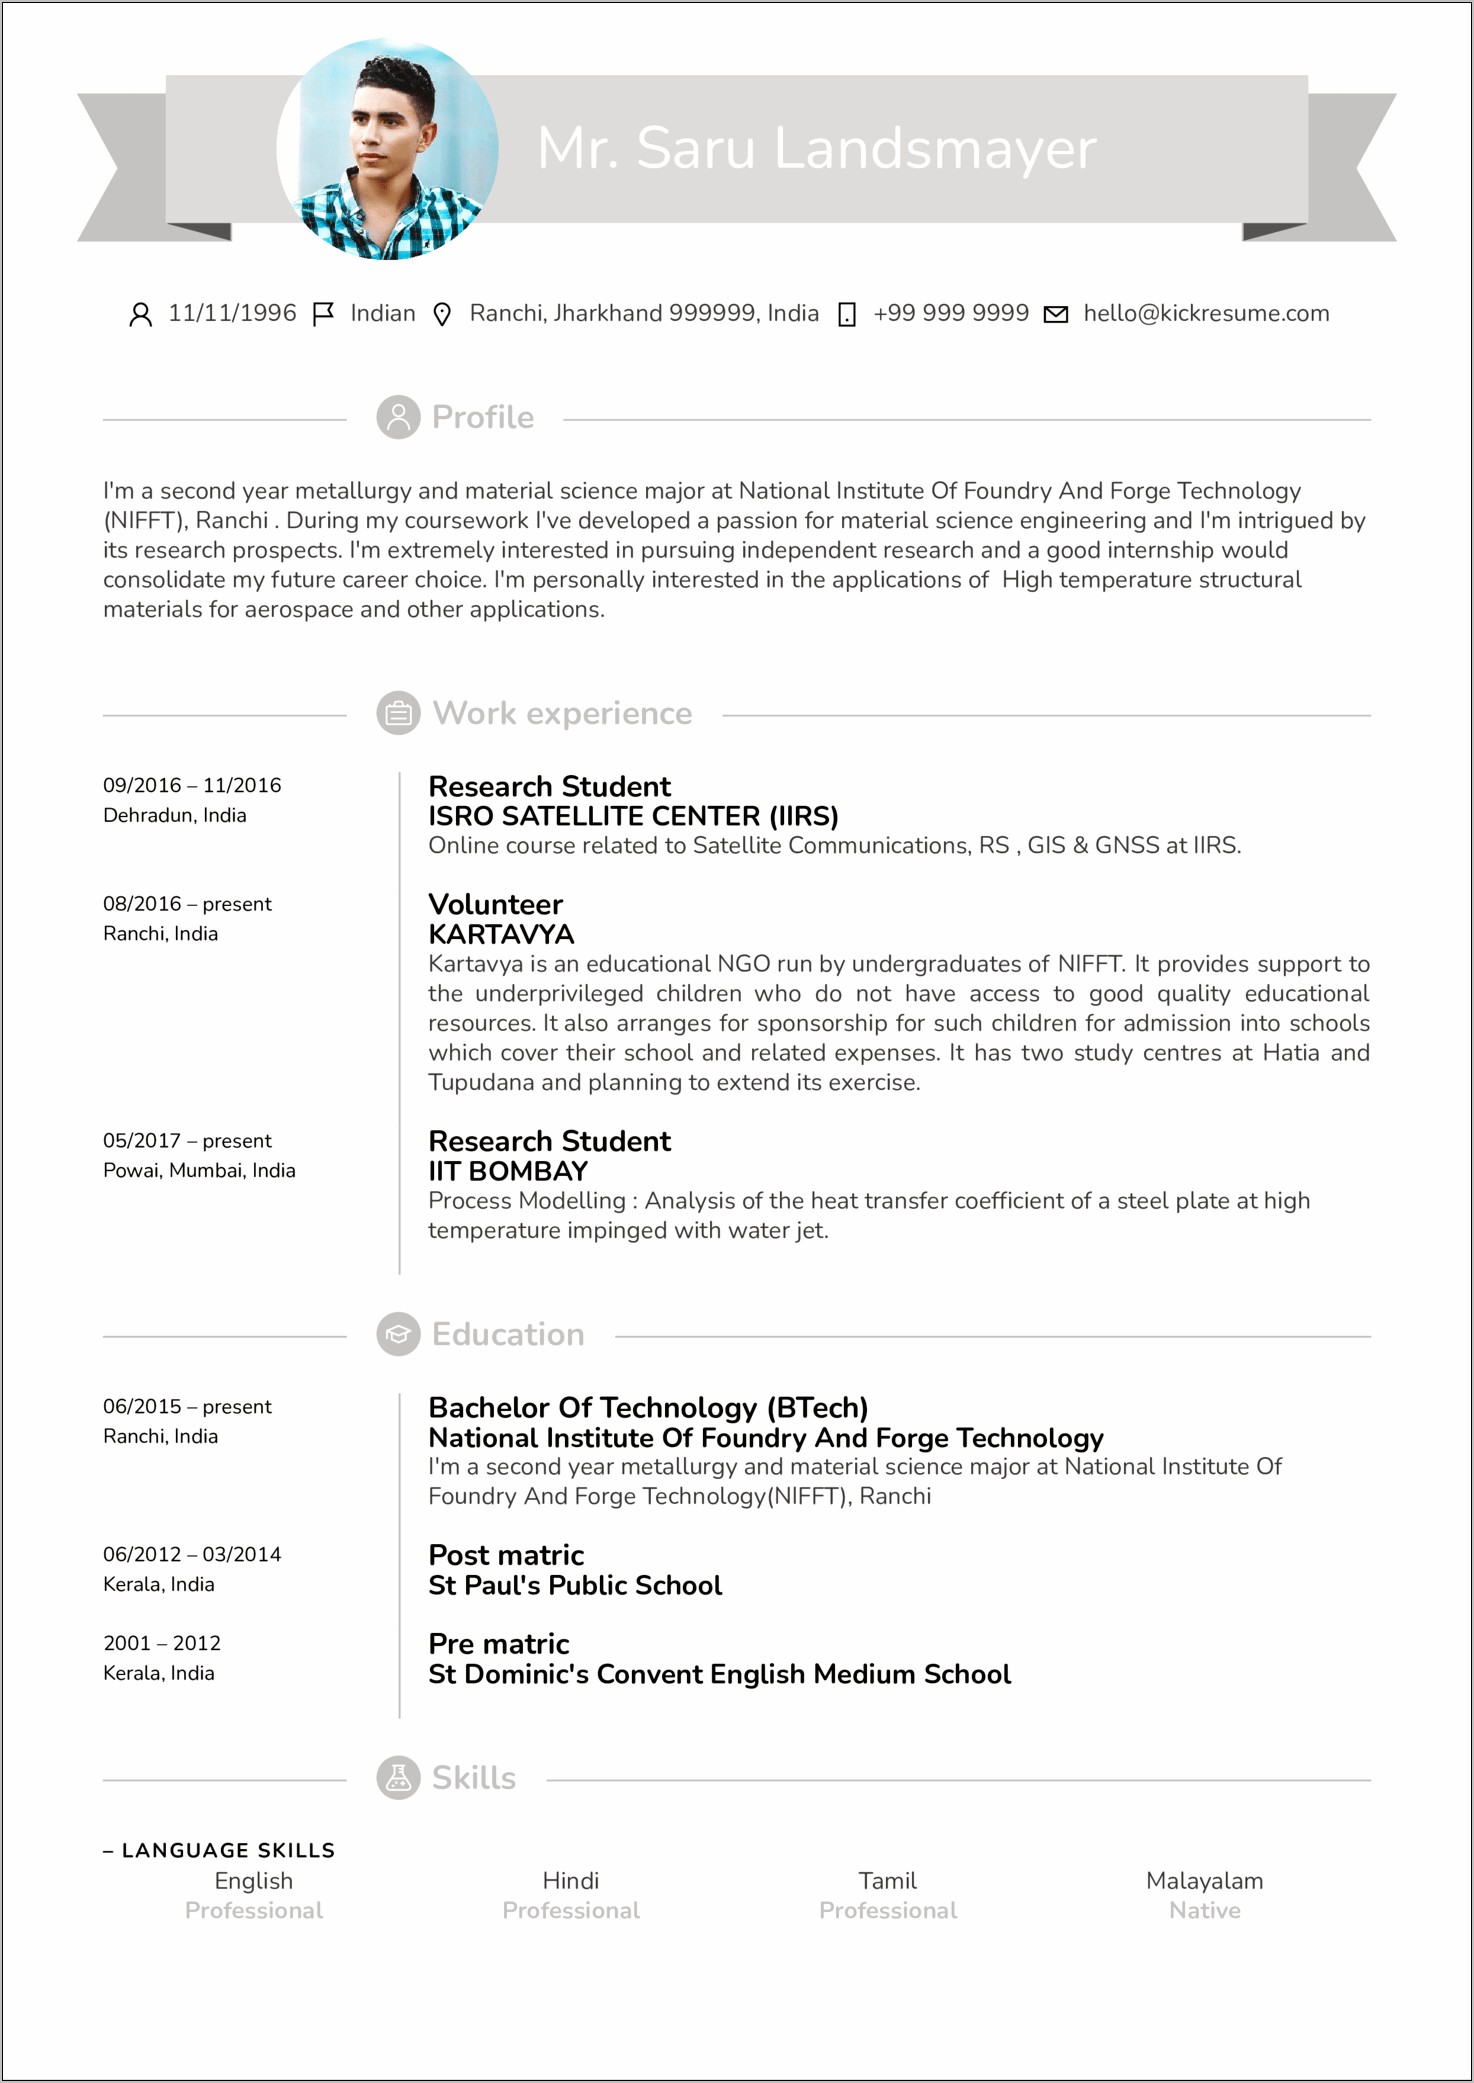 Listing Research Skills On Resume